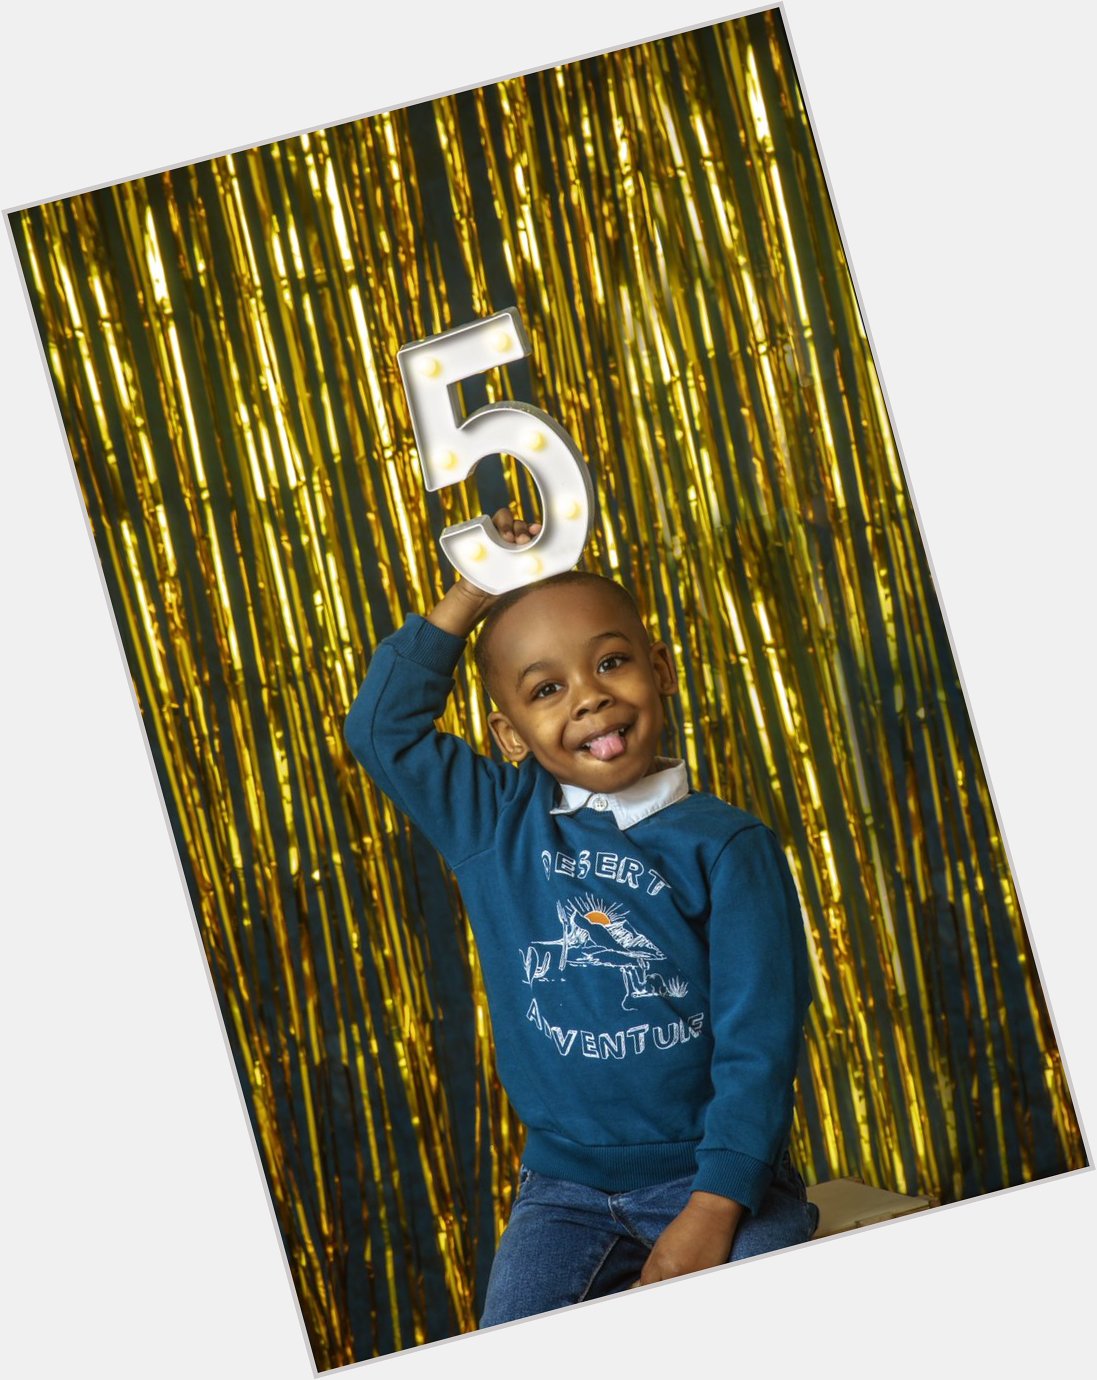 The big 5! 

A birthday shoot for this little Prince!
Happy birthday Isaiah The Proud mother  